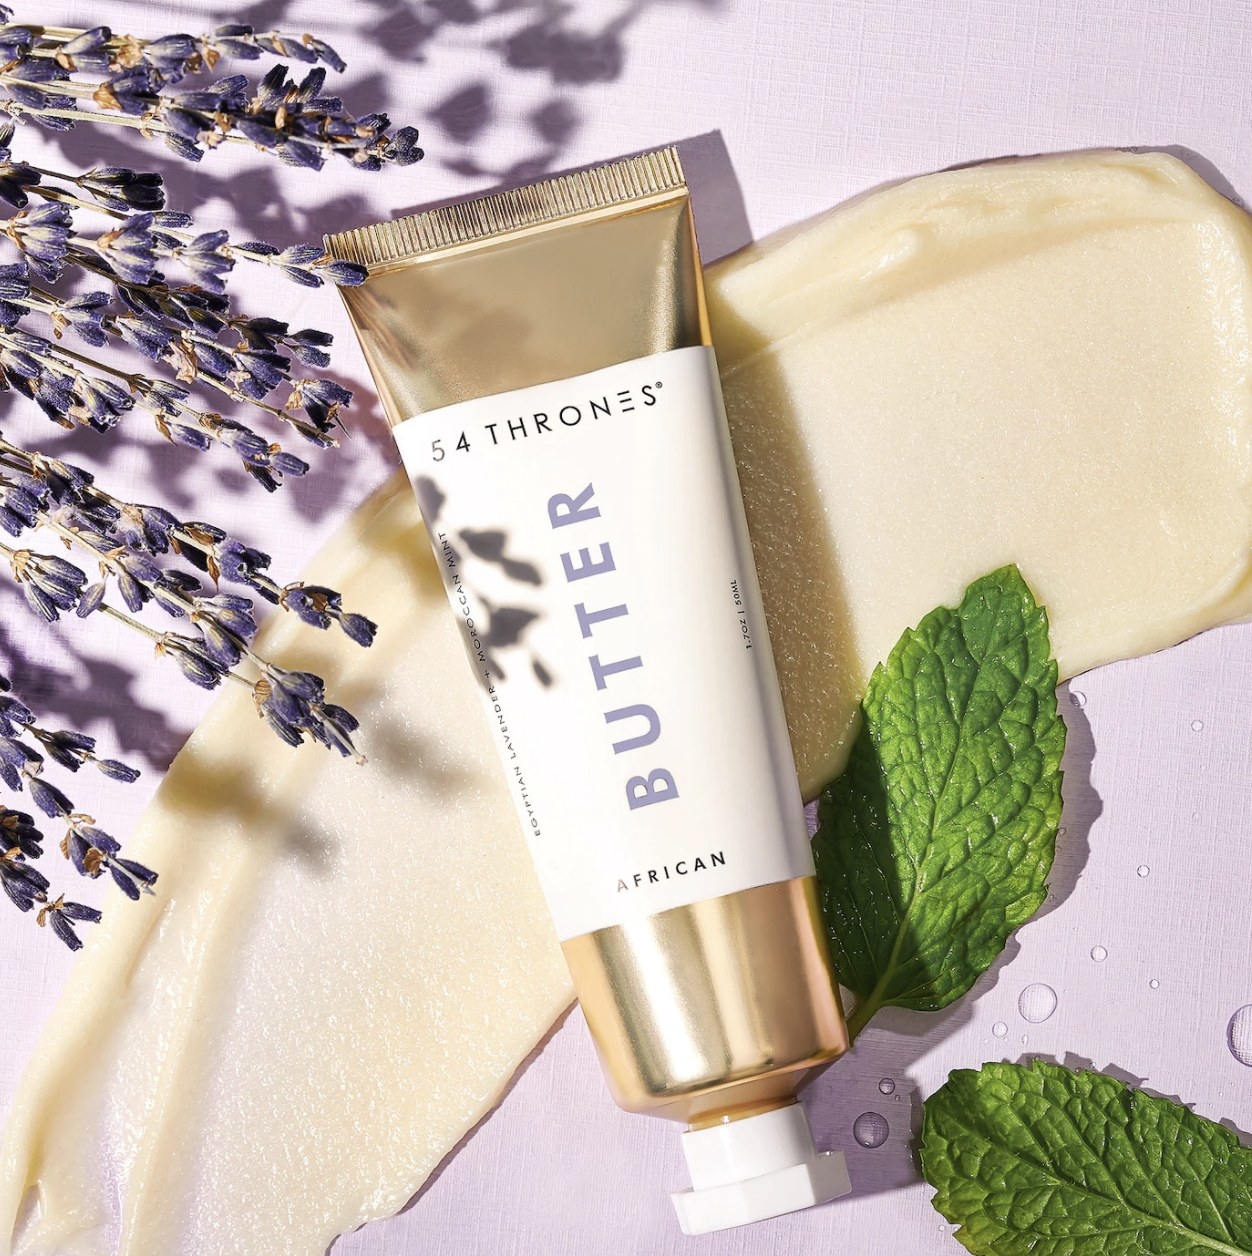 The tube of body butter over streak of the butter with lilac and mint